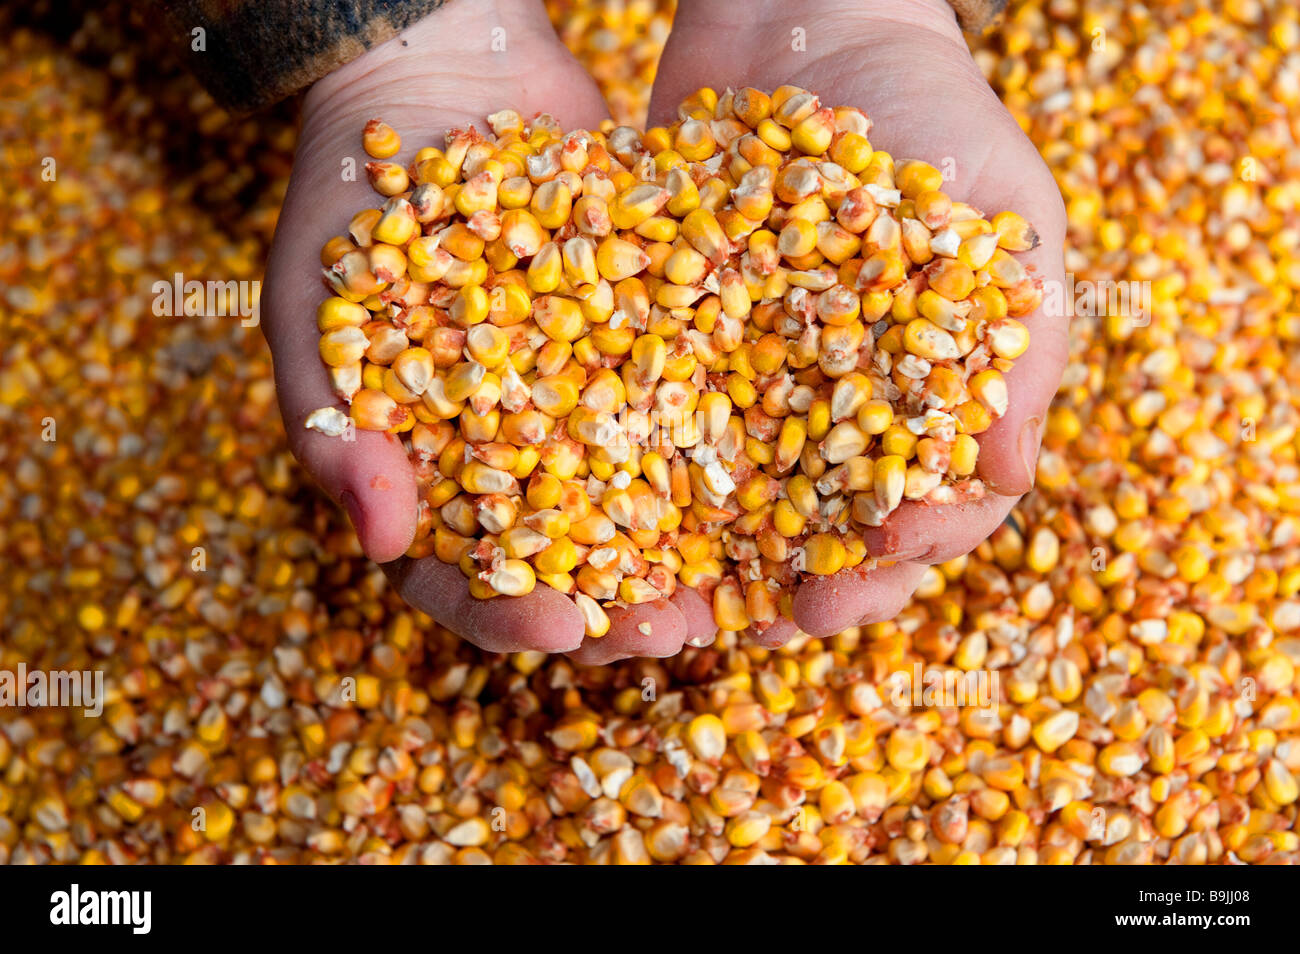 Farmer holding corn in cupped hands Stock Photo